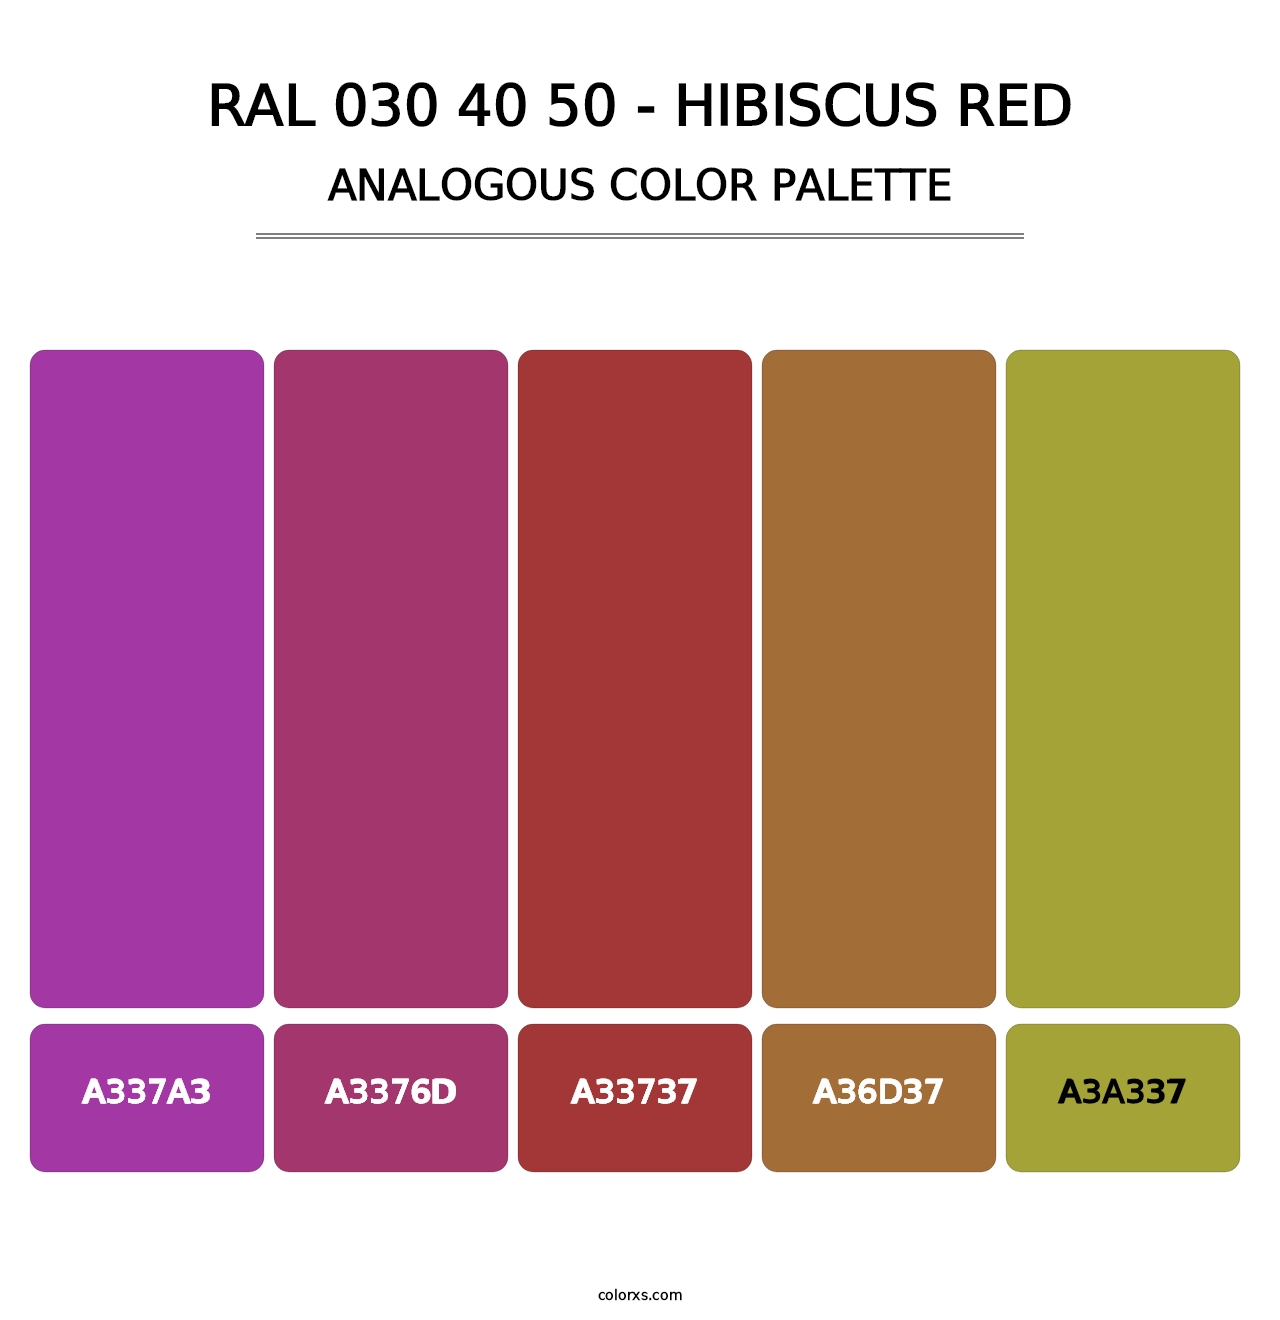 RAL 030 40 50 - Hibiscus Red - Analogous Color Palette